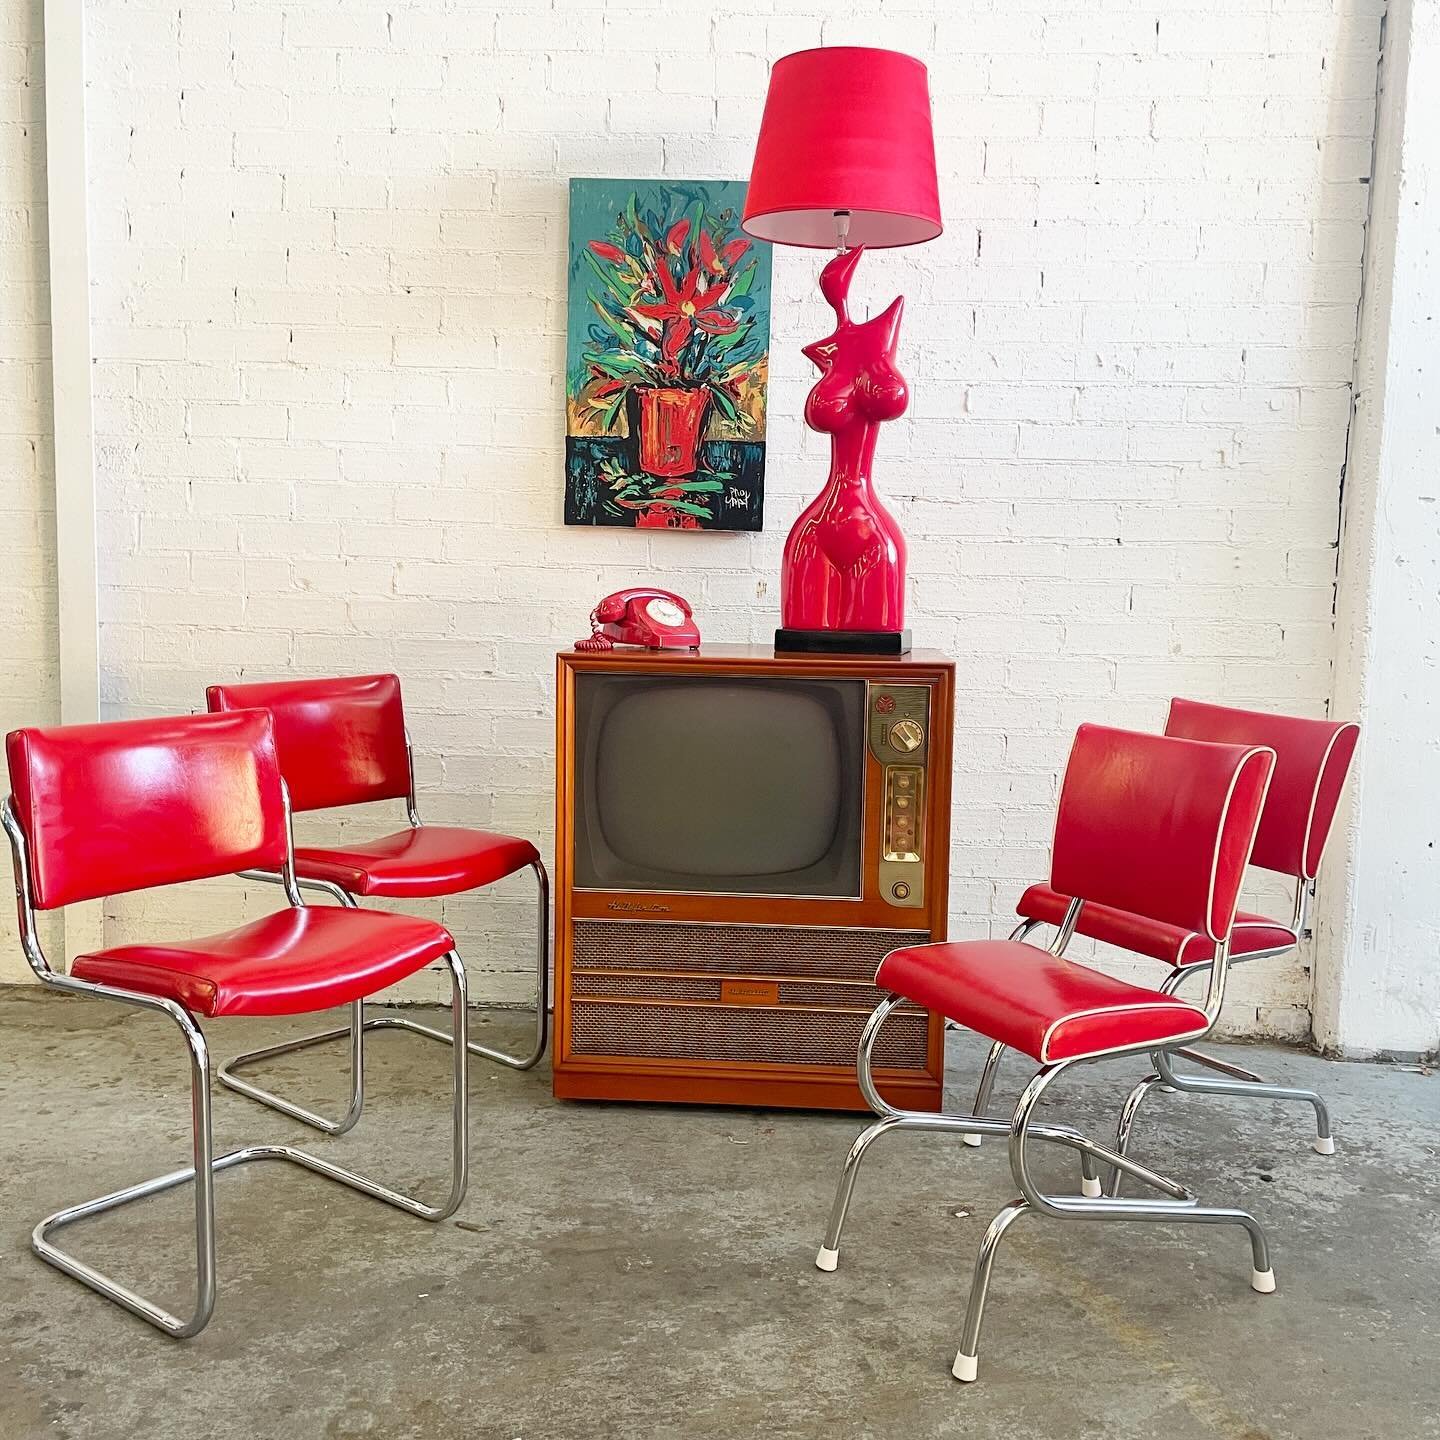 Need a little red? We have it all here at Mitchell Road Antique and Design Centre.
Call 0418160727

#red #chairs #retro #design #art #tv #tvs #50s #phones #dialphone #sidetables #chilli #lampshade